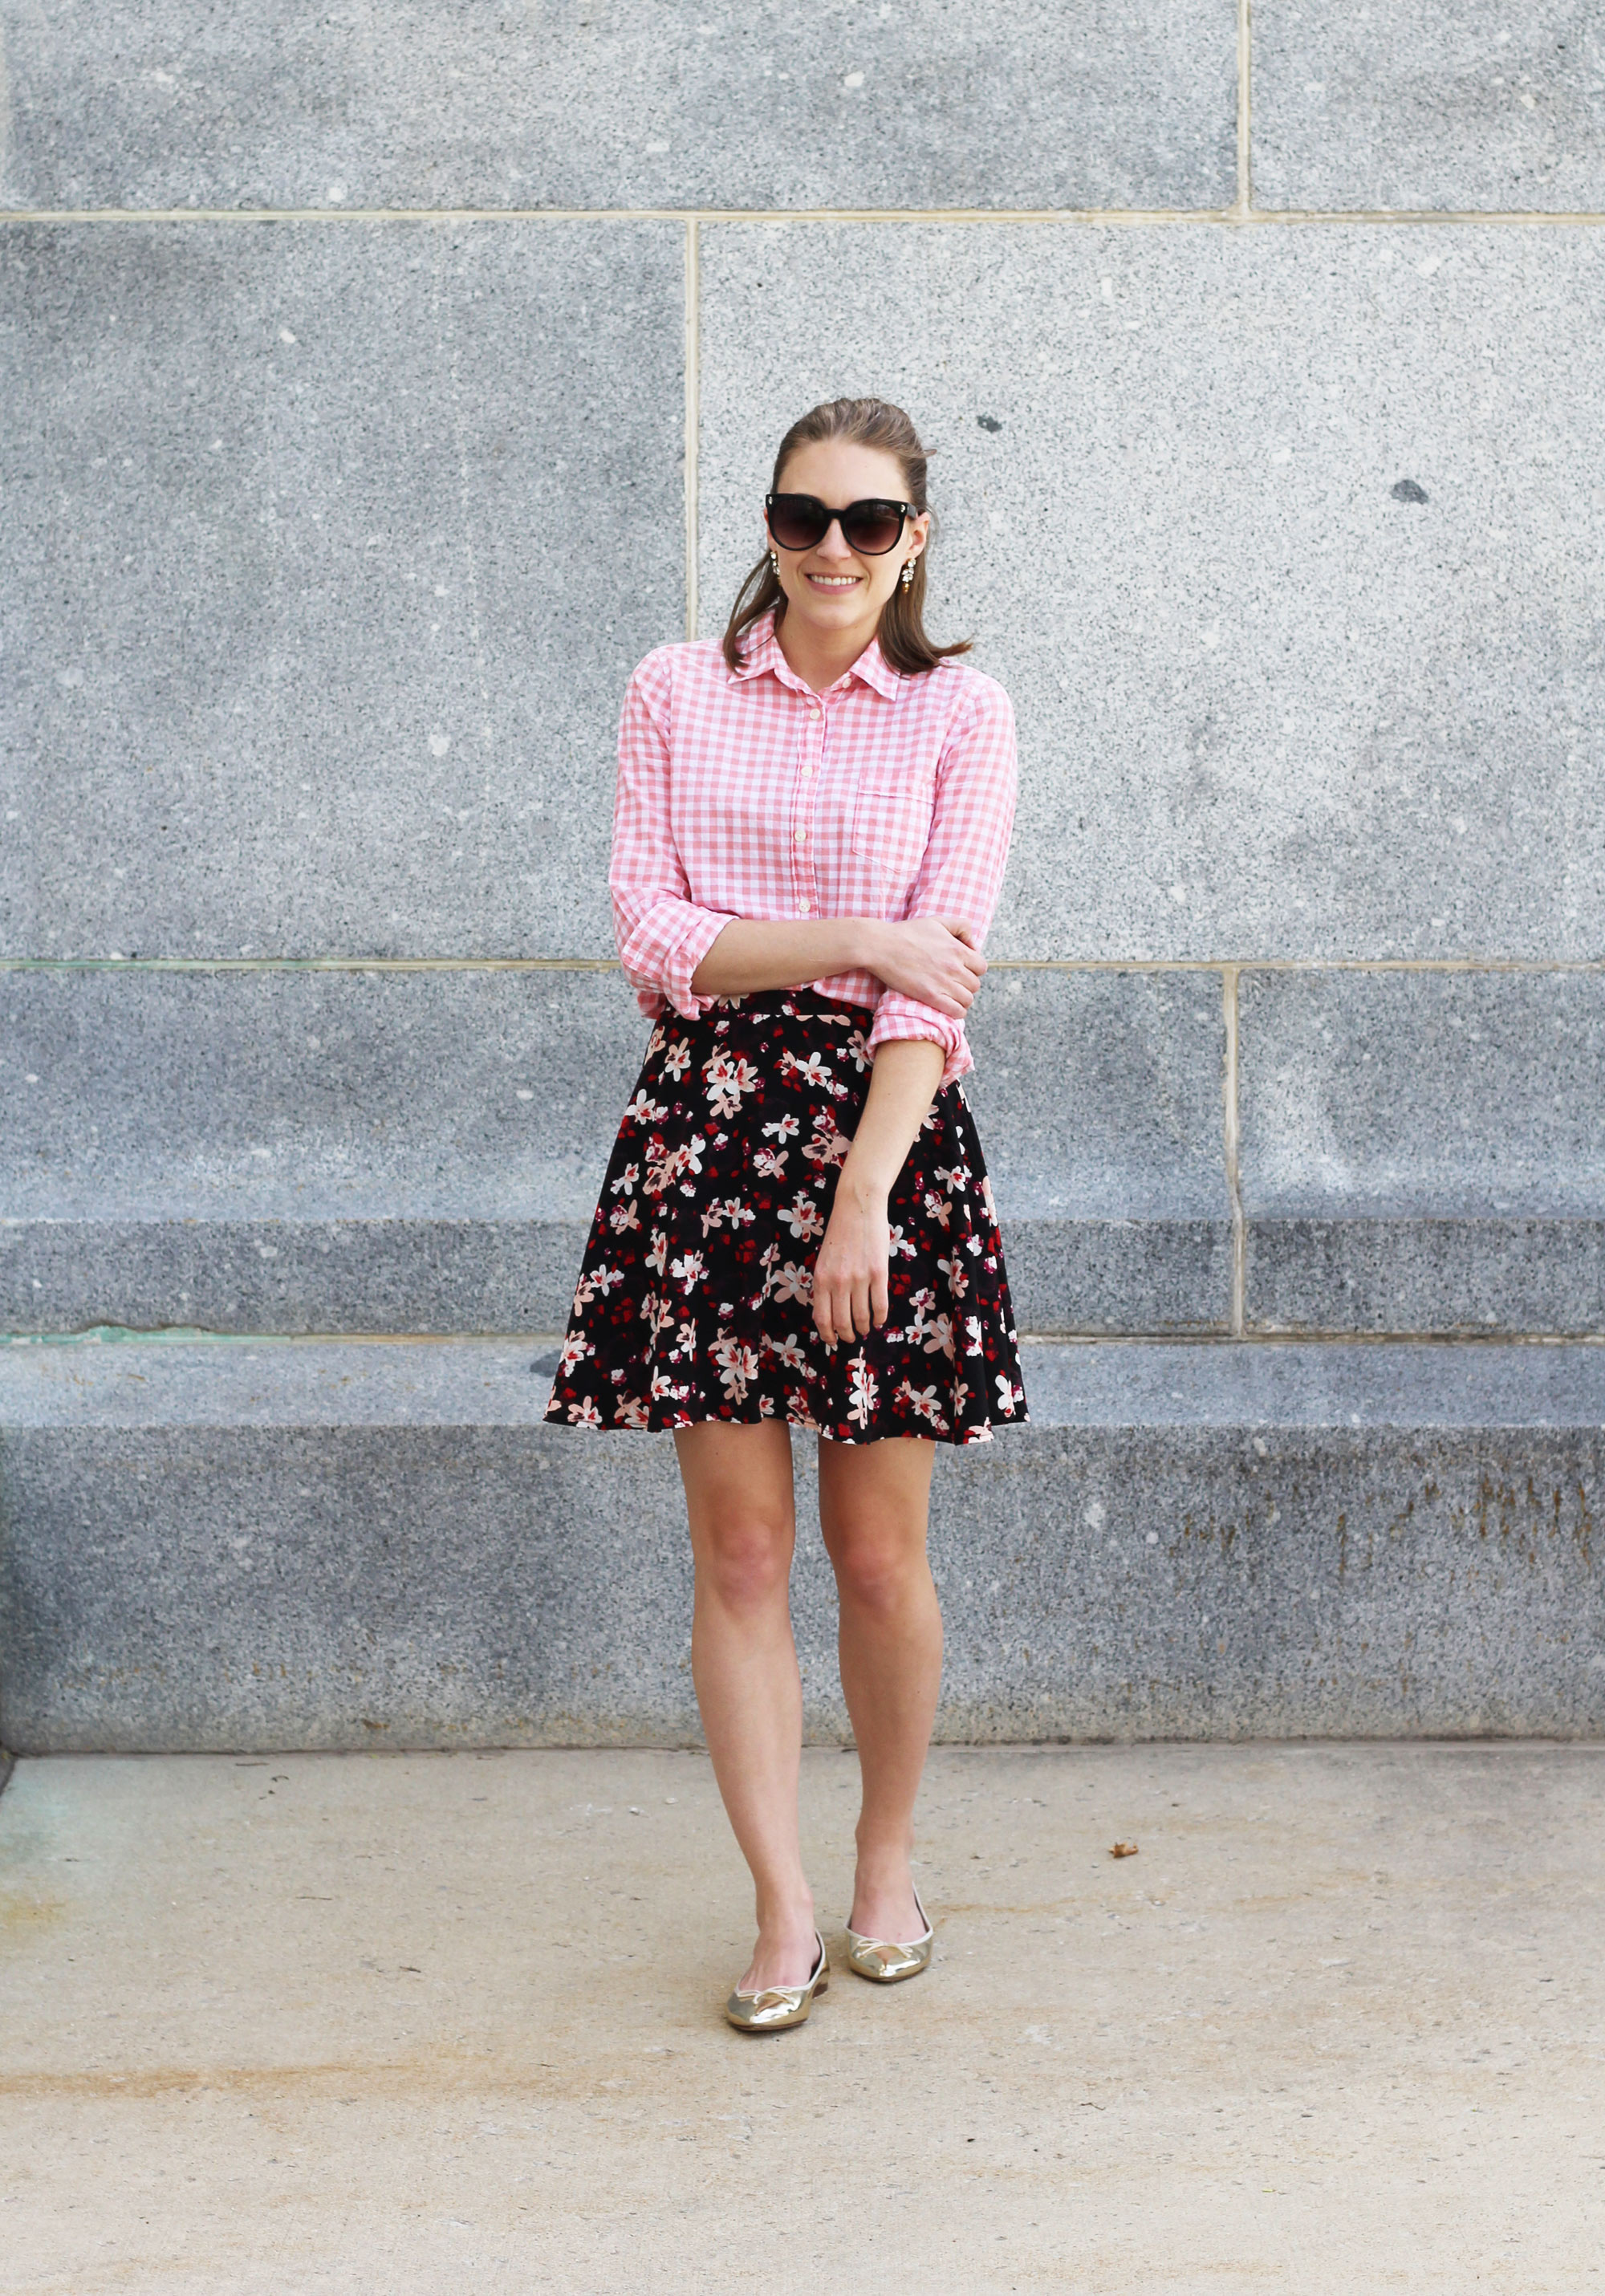 Spring grad school outfit idea with a pink gingham shirt and floral skirt | Cotton Cashmere Cat Hair